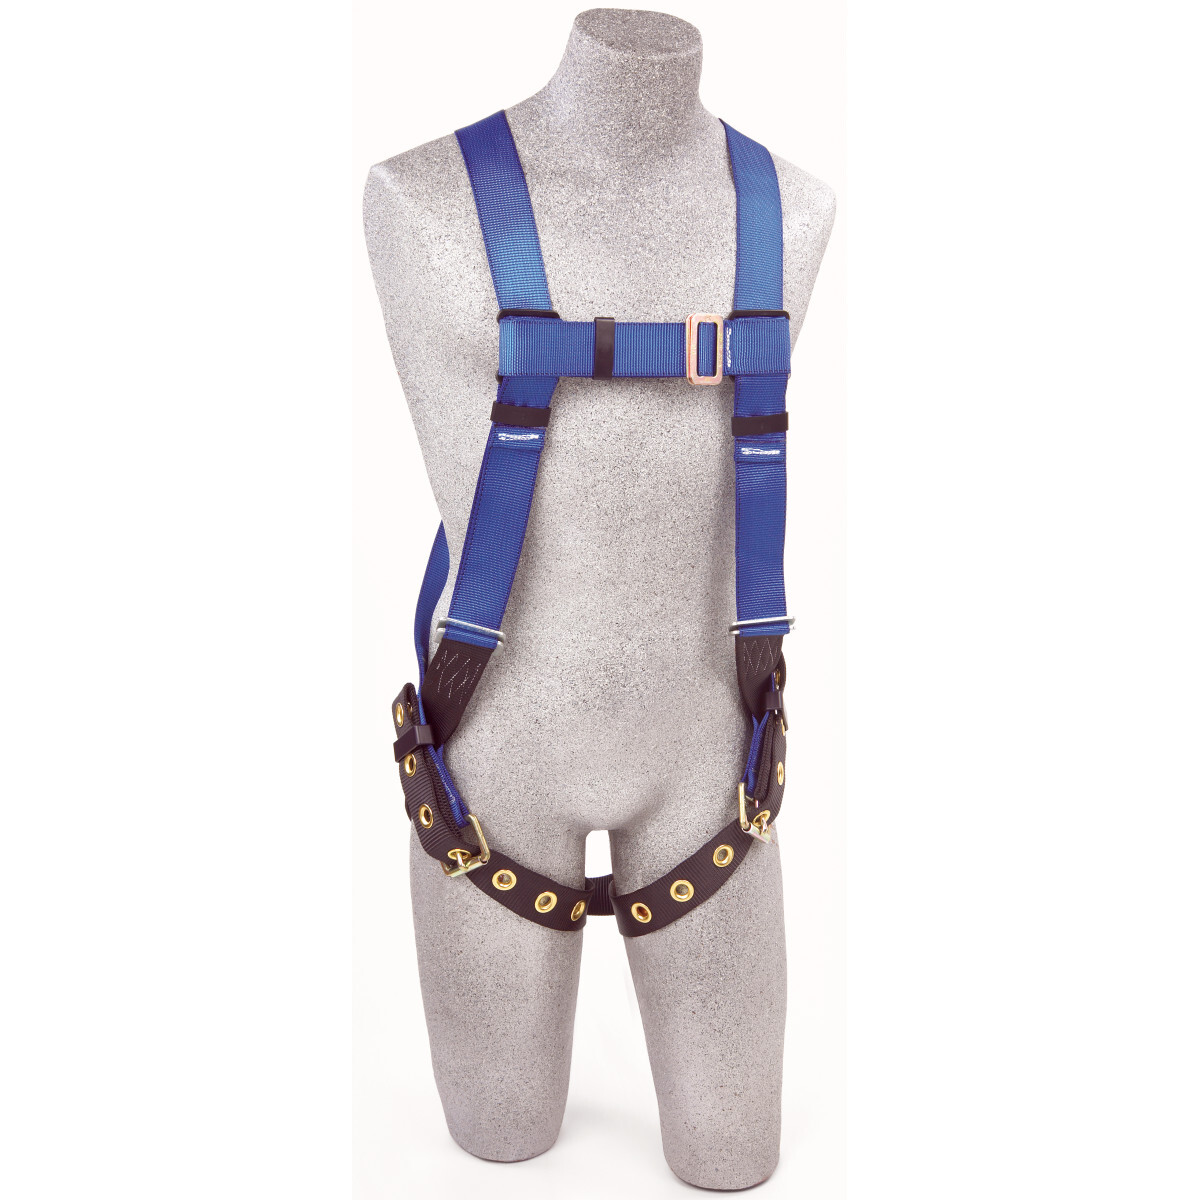 3M™ DBI-SALA® X-Large PROTECTA® FIRST™ Full Body Style Harness With Back D-Ring, Tongue Leg Strap Buckle, Pass-Thru Chest Strap